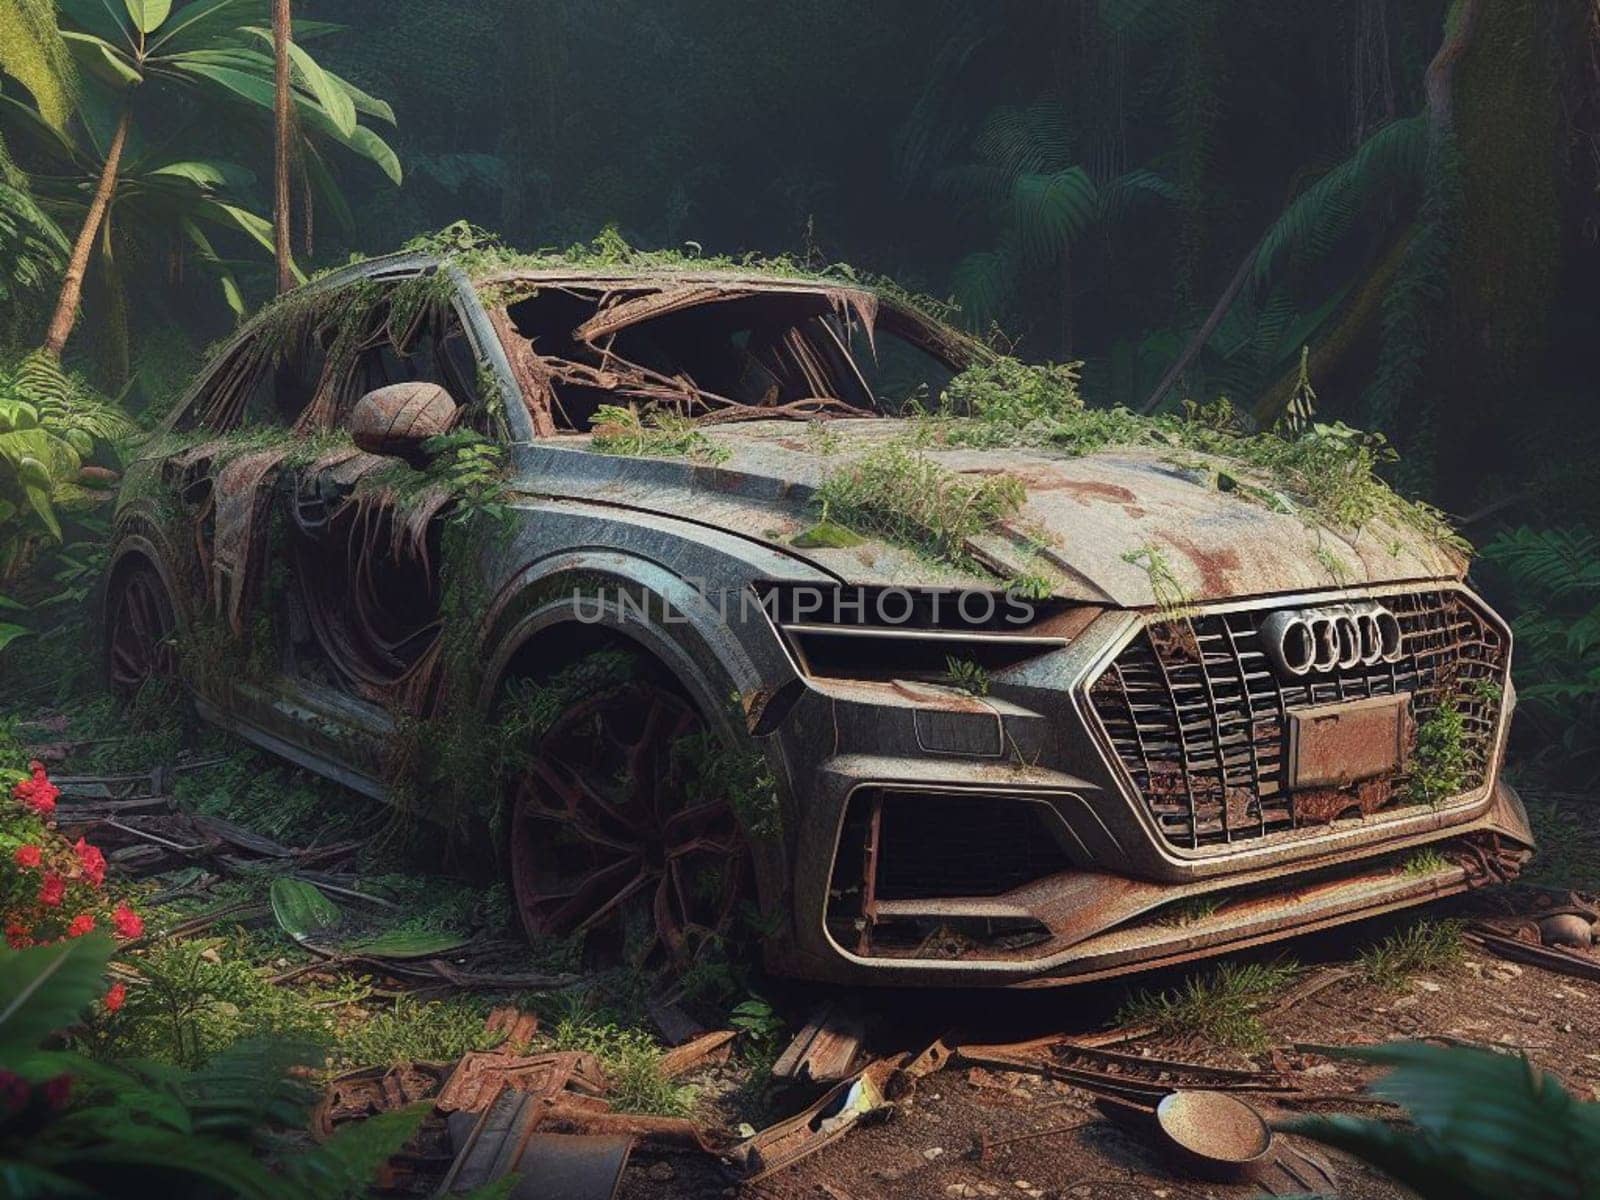 Abandoned rusty petrol luxury suv banned for co2 emission agenda, overgrowth plants bloom flowers by verbano